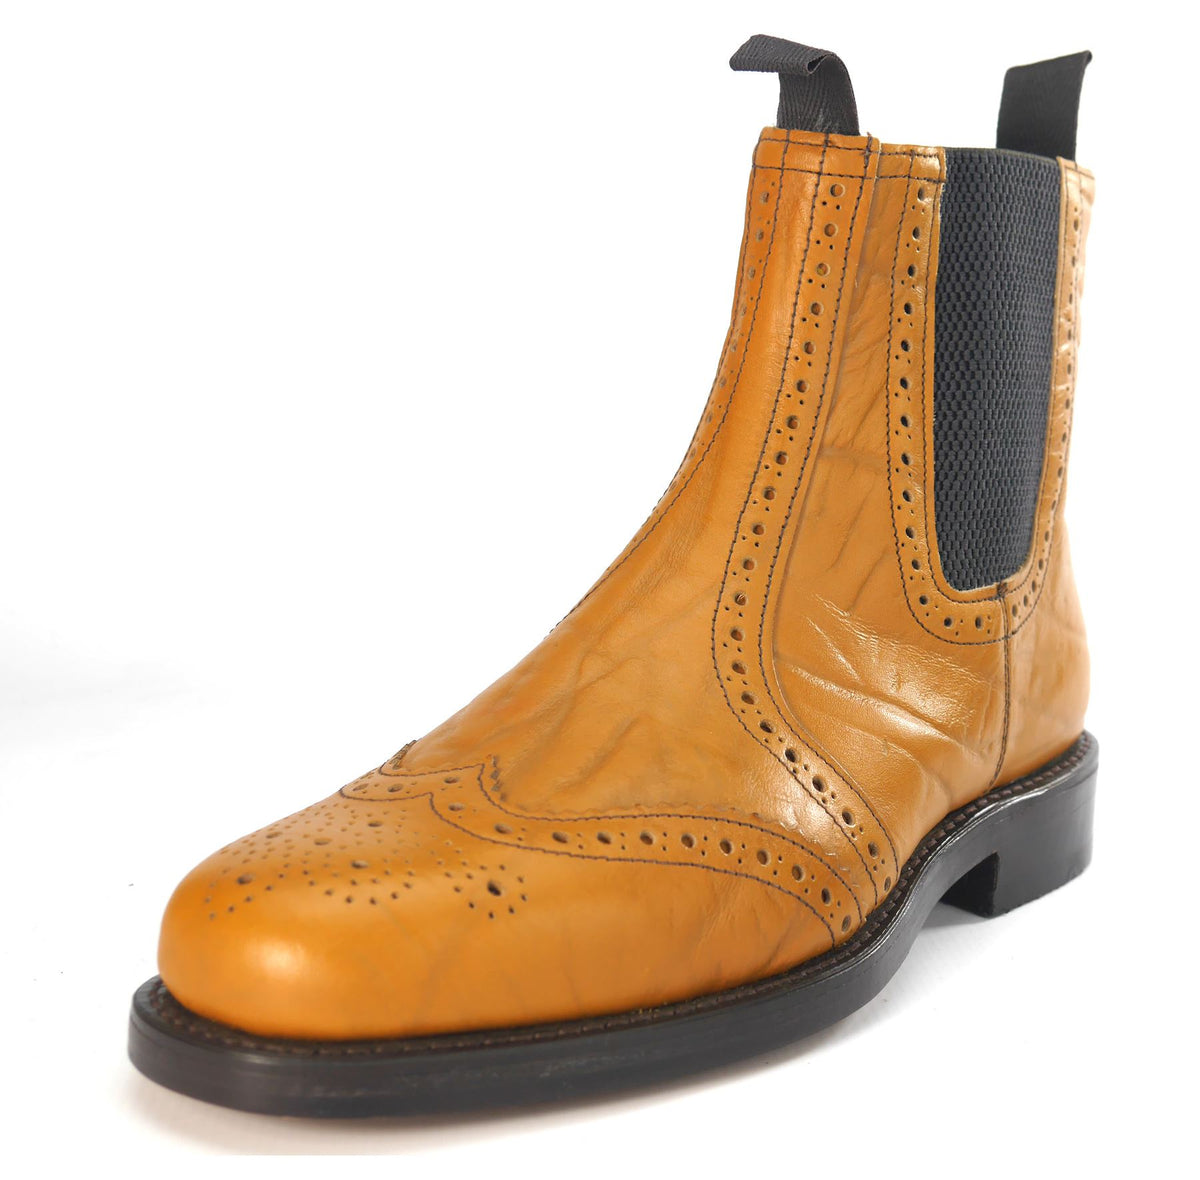 Charles Horrel England CH2003 Welted Leather Sole Brogue Chelsea Boots